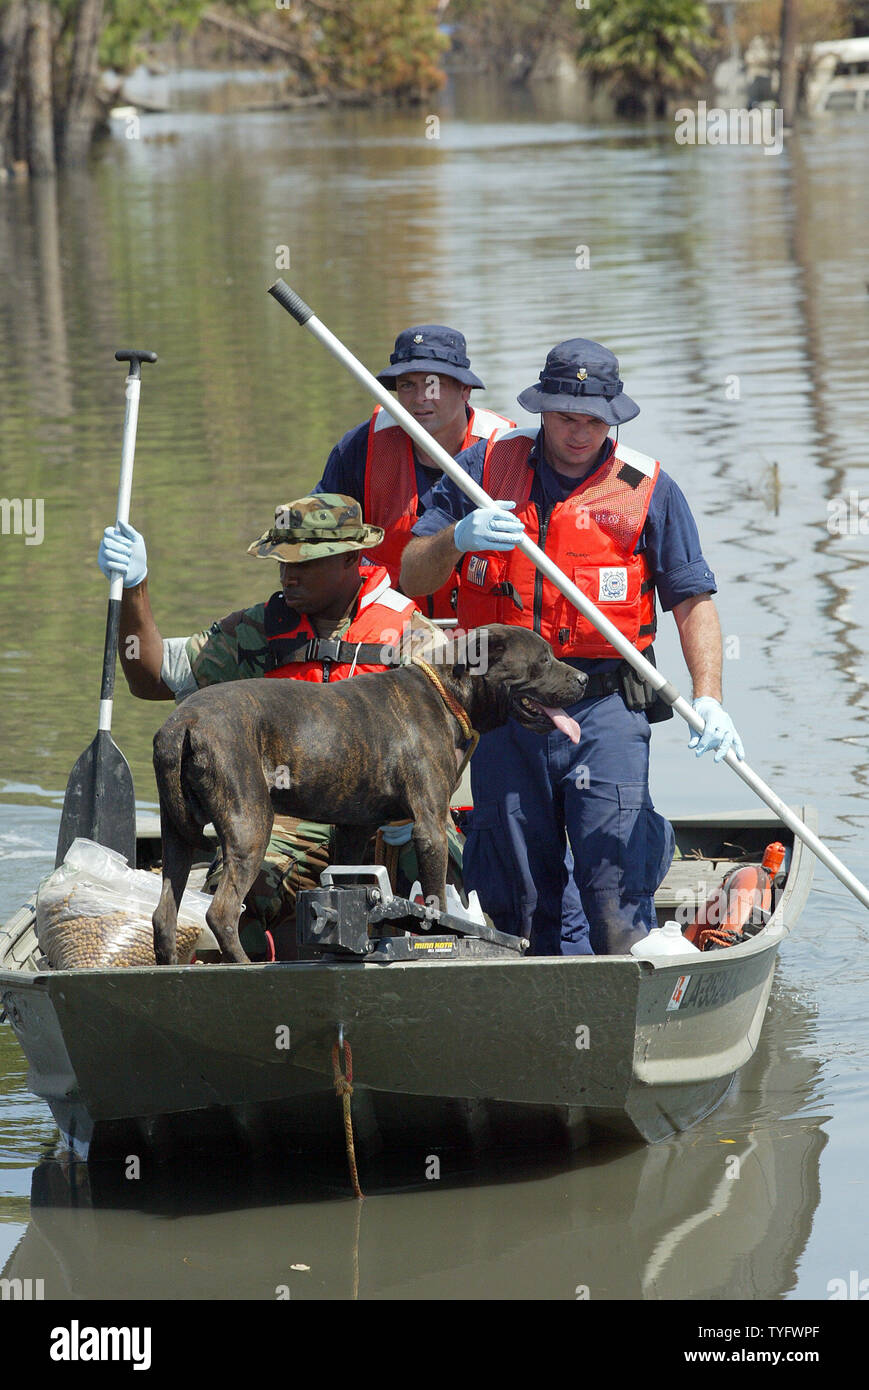 U.S. Coast Guard members from Port Arthur, Texas, return to shore with a dog they rescued while on patrol in Lakeview, New Orleans, close to the 17th Street Canal levee breach on Sept. 11, 2005. Rescue personel continue to pull out people and pets nearly two weeks after Hurricane Katrina hit the Gulf Coast.  (UPI Photo/A.J. Sisco) Stock Photo